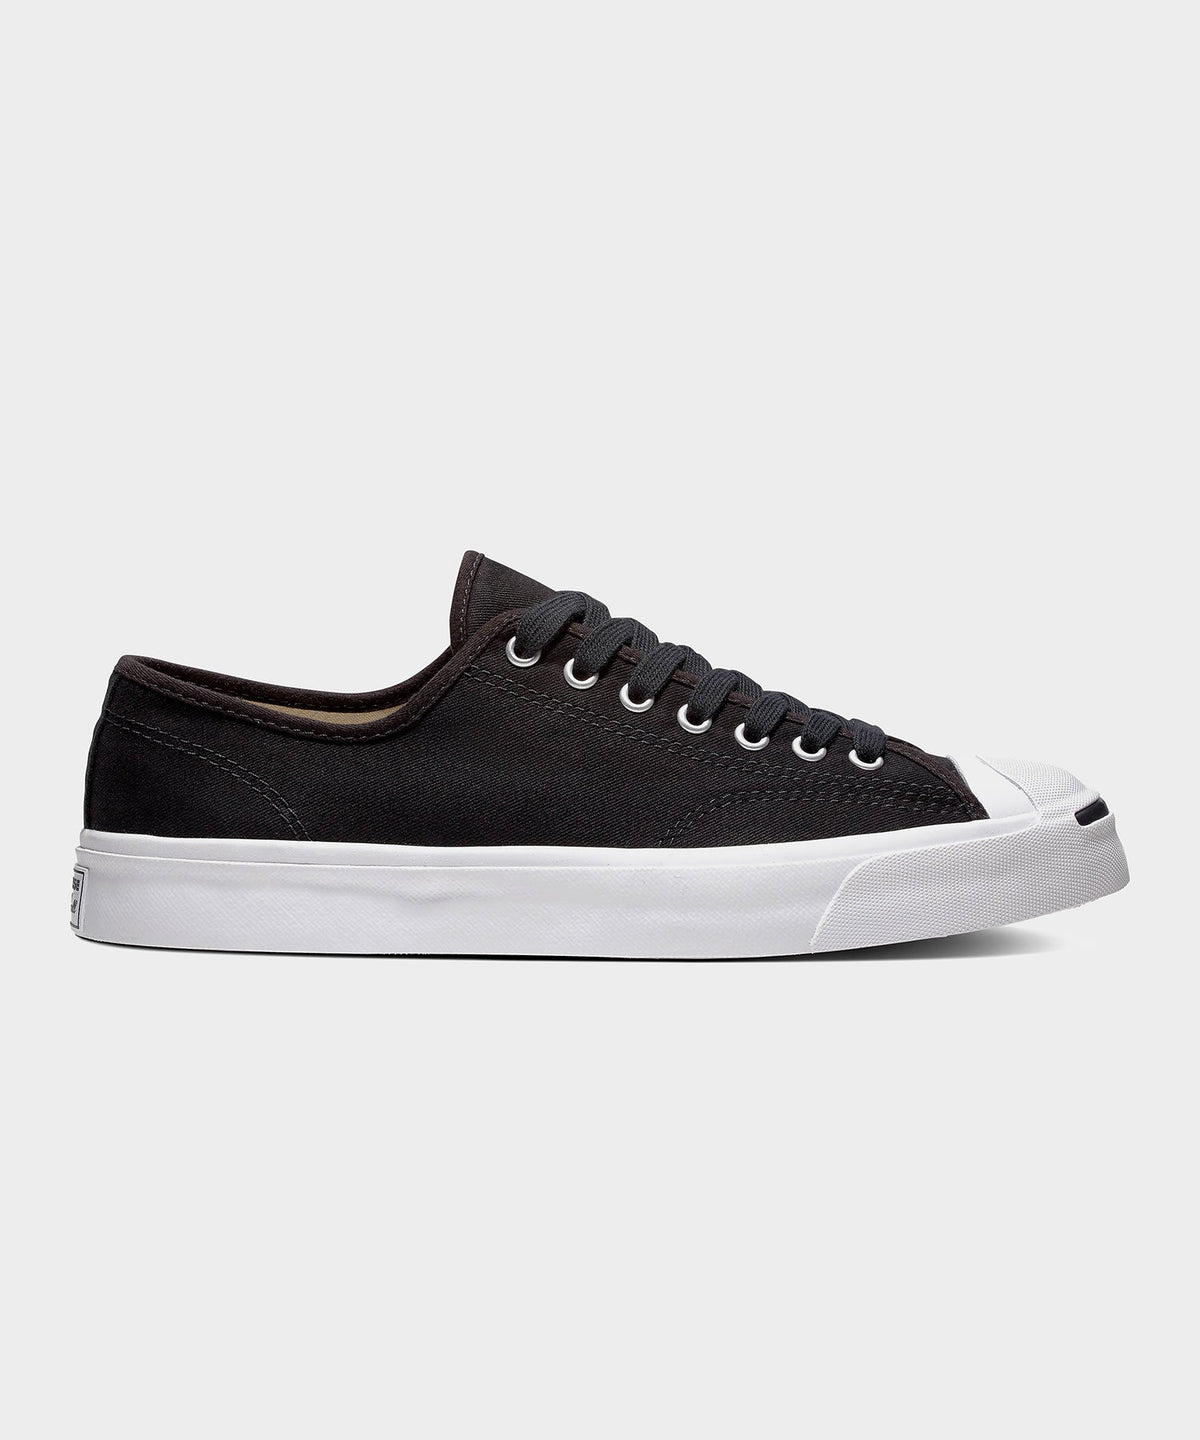 Converse Jack Purcell Canvas in Black